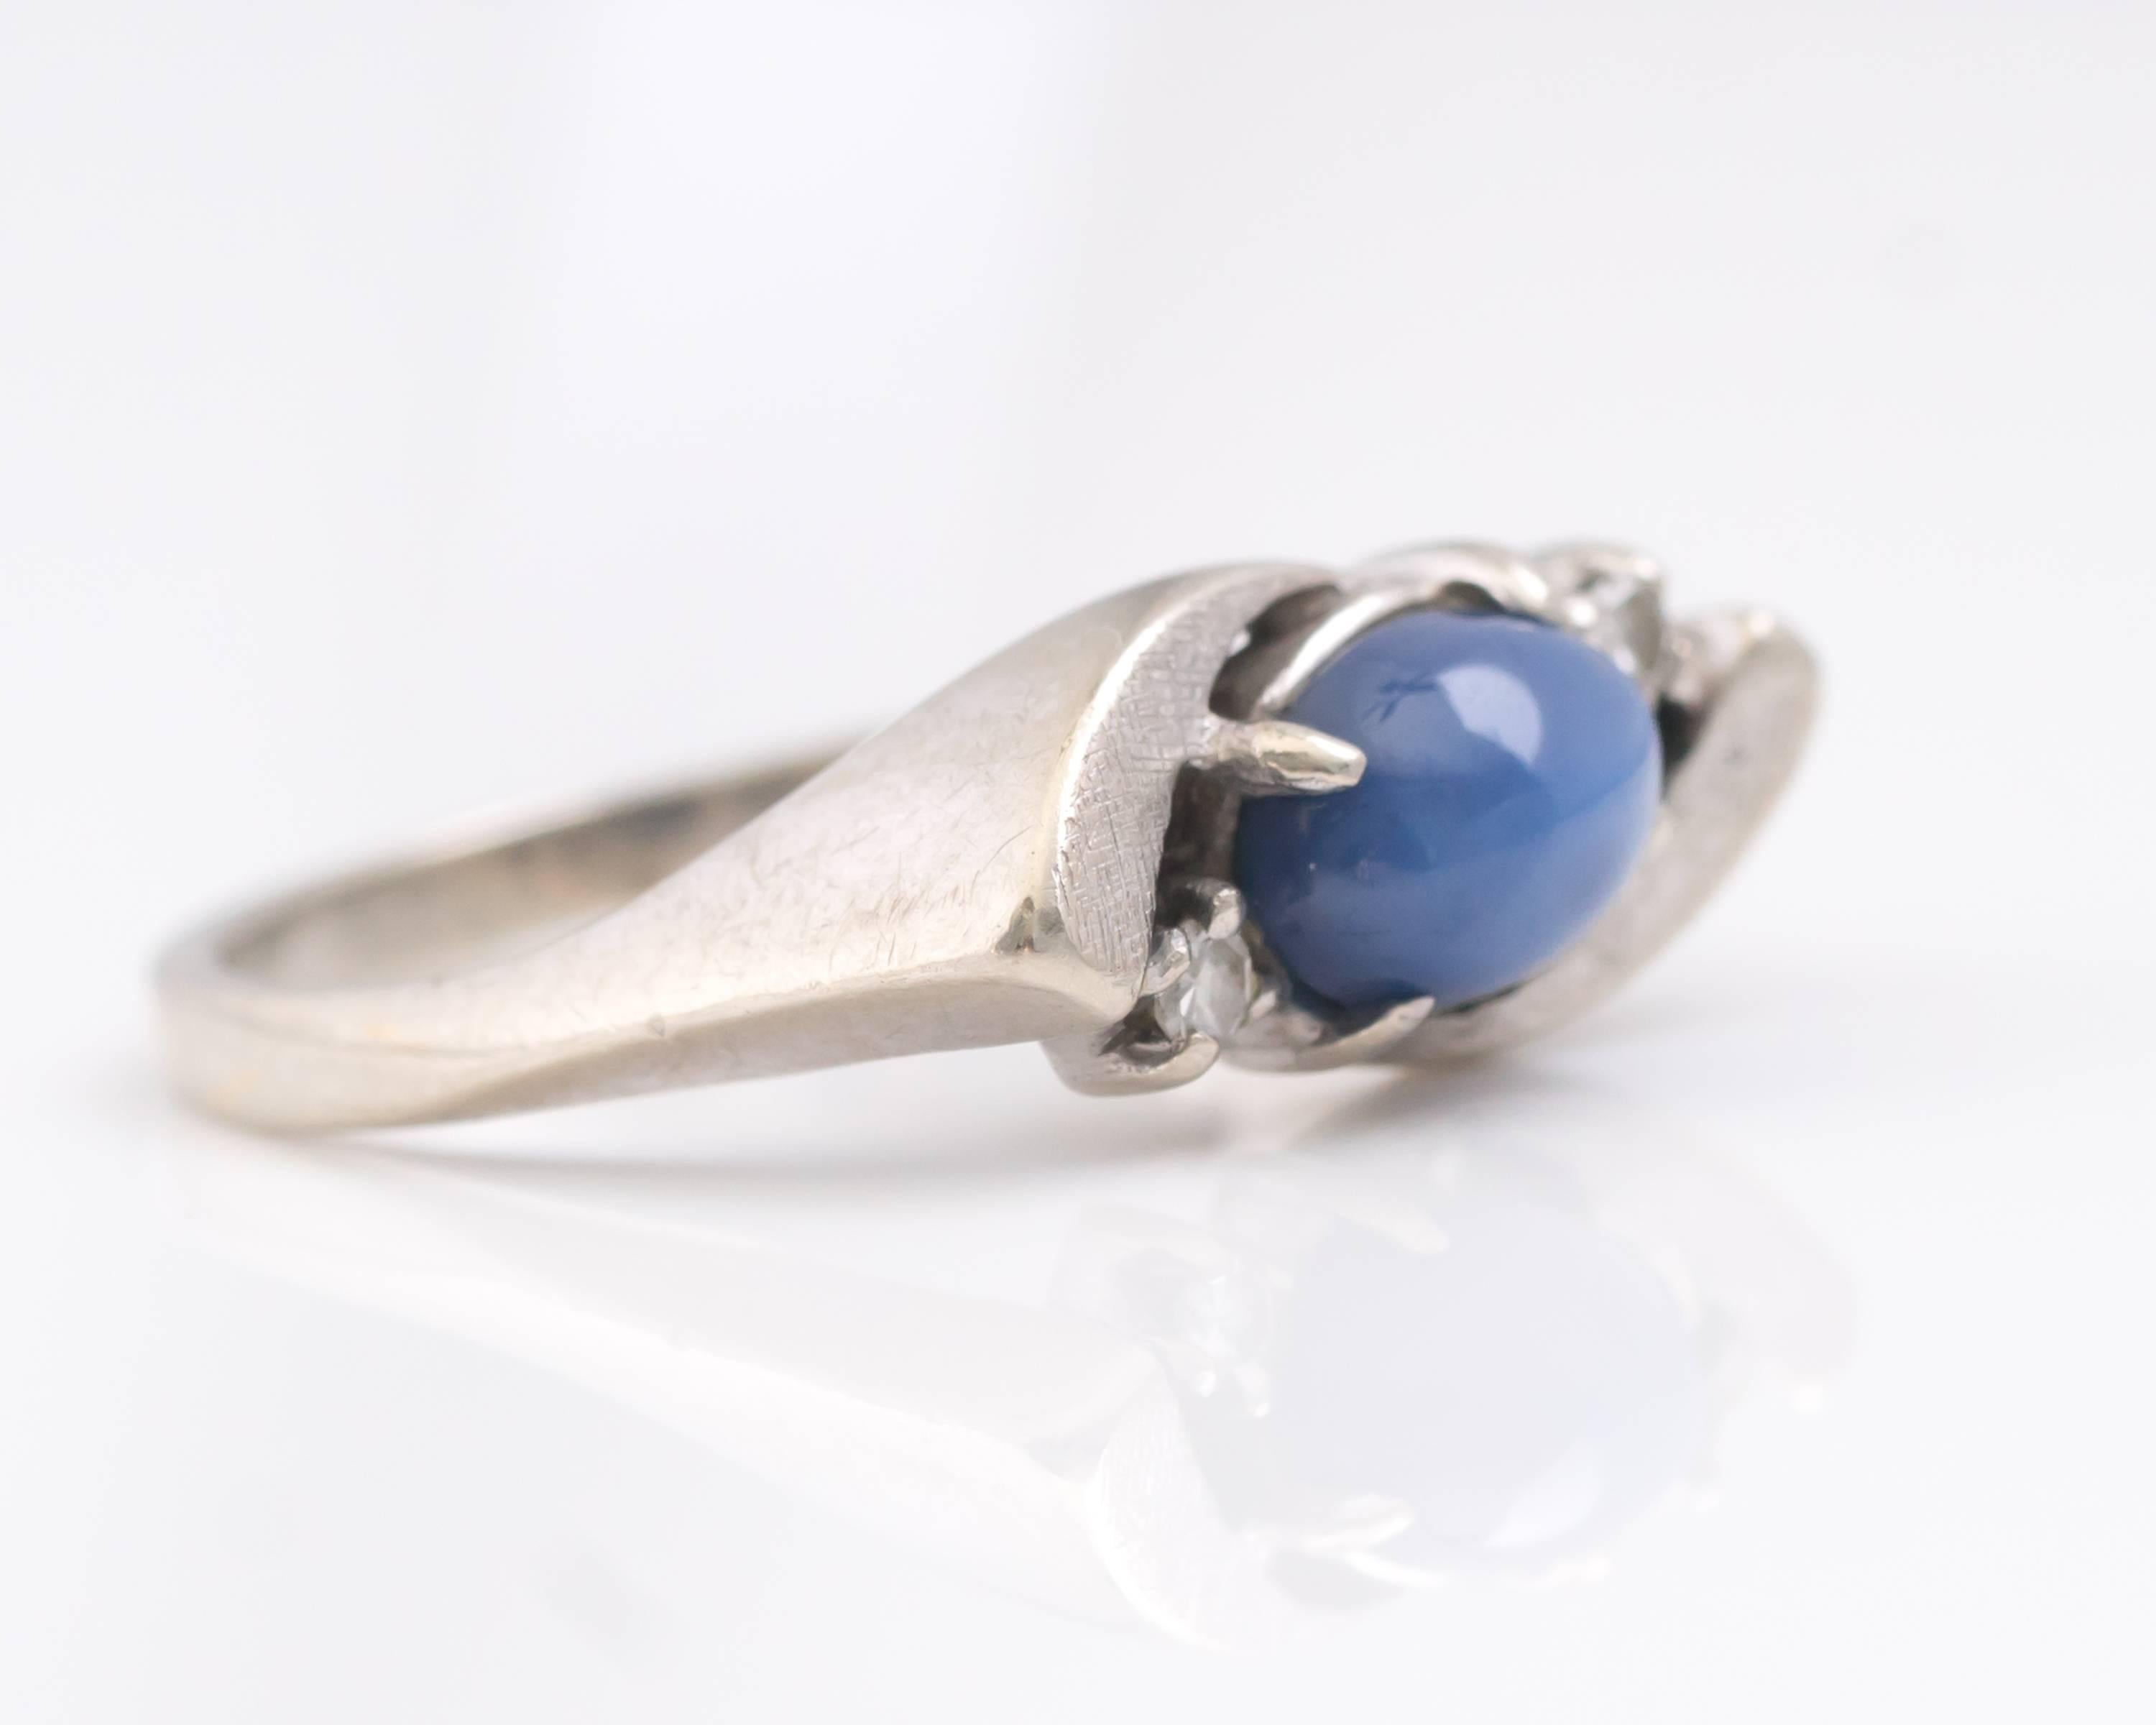 1950s Retro Blue Star Sapphire Bypass Ring - 14 Karat White Gold

Features a .25 carat Oval Cabochon Blue Star Sapphire, 2 Round Brilliant Diamonds and 14 Karat White Gold.
The medium blue Sapphire center stone is flanked by 2 Round Brilliant accent